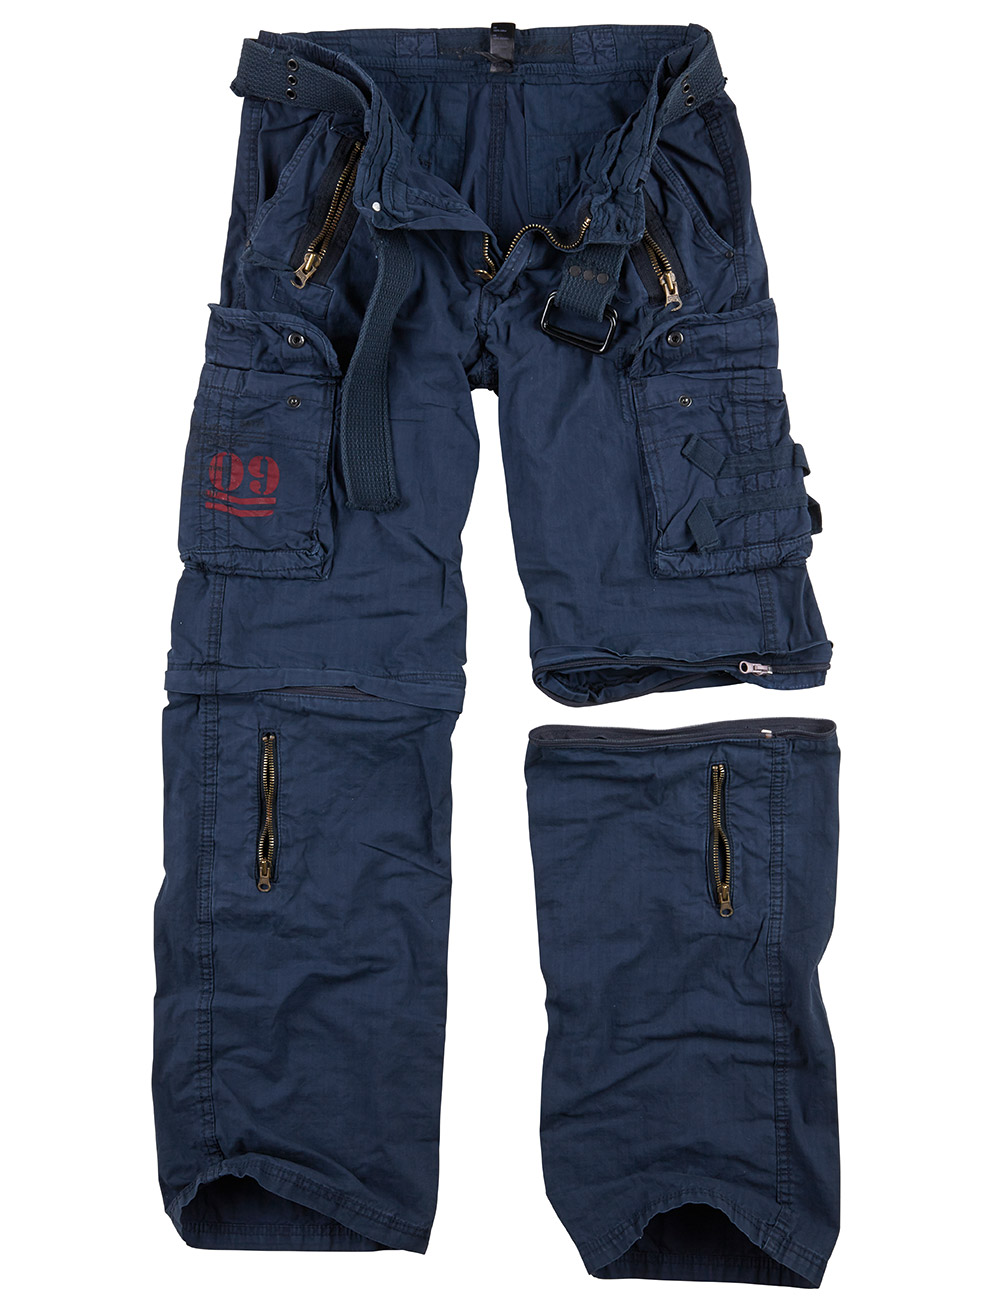 Royal Outback Trouser